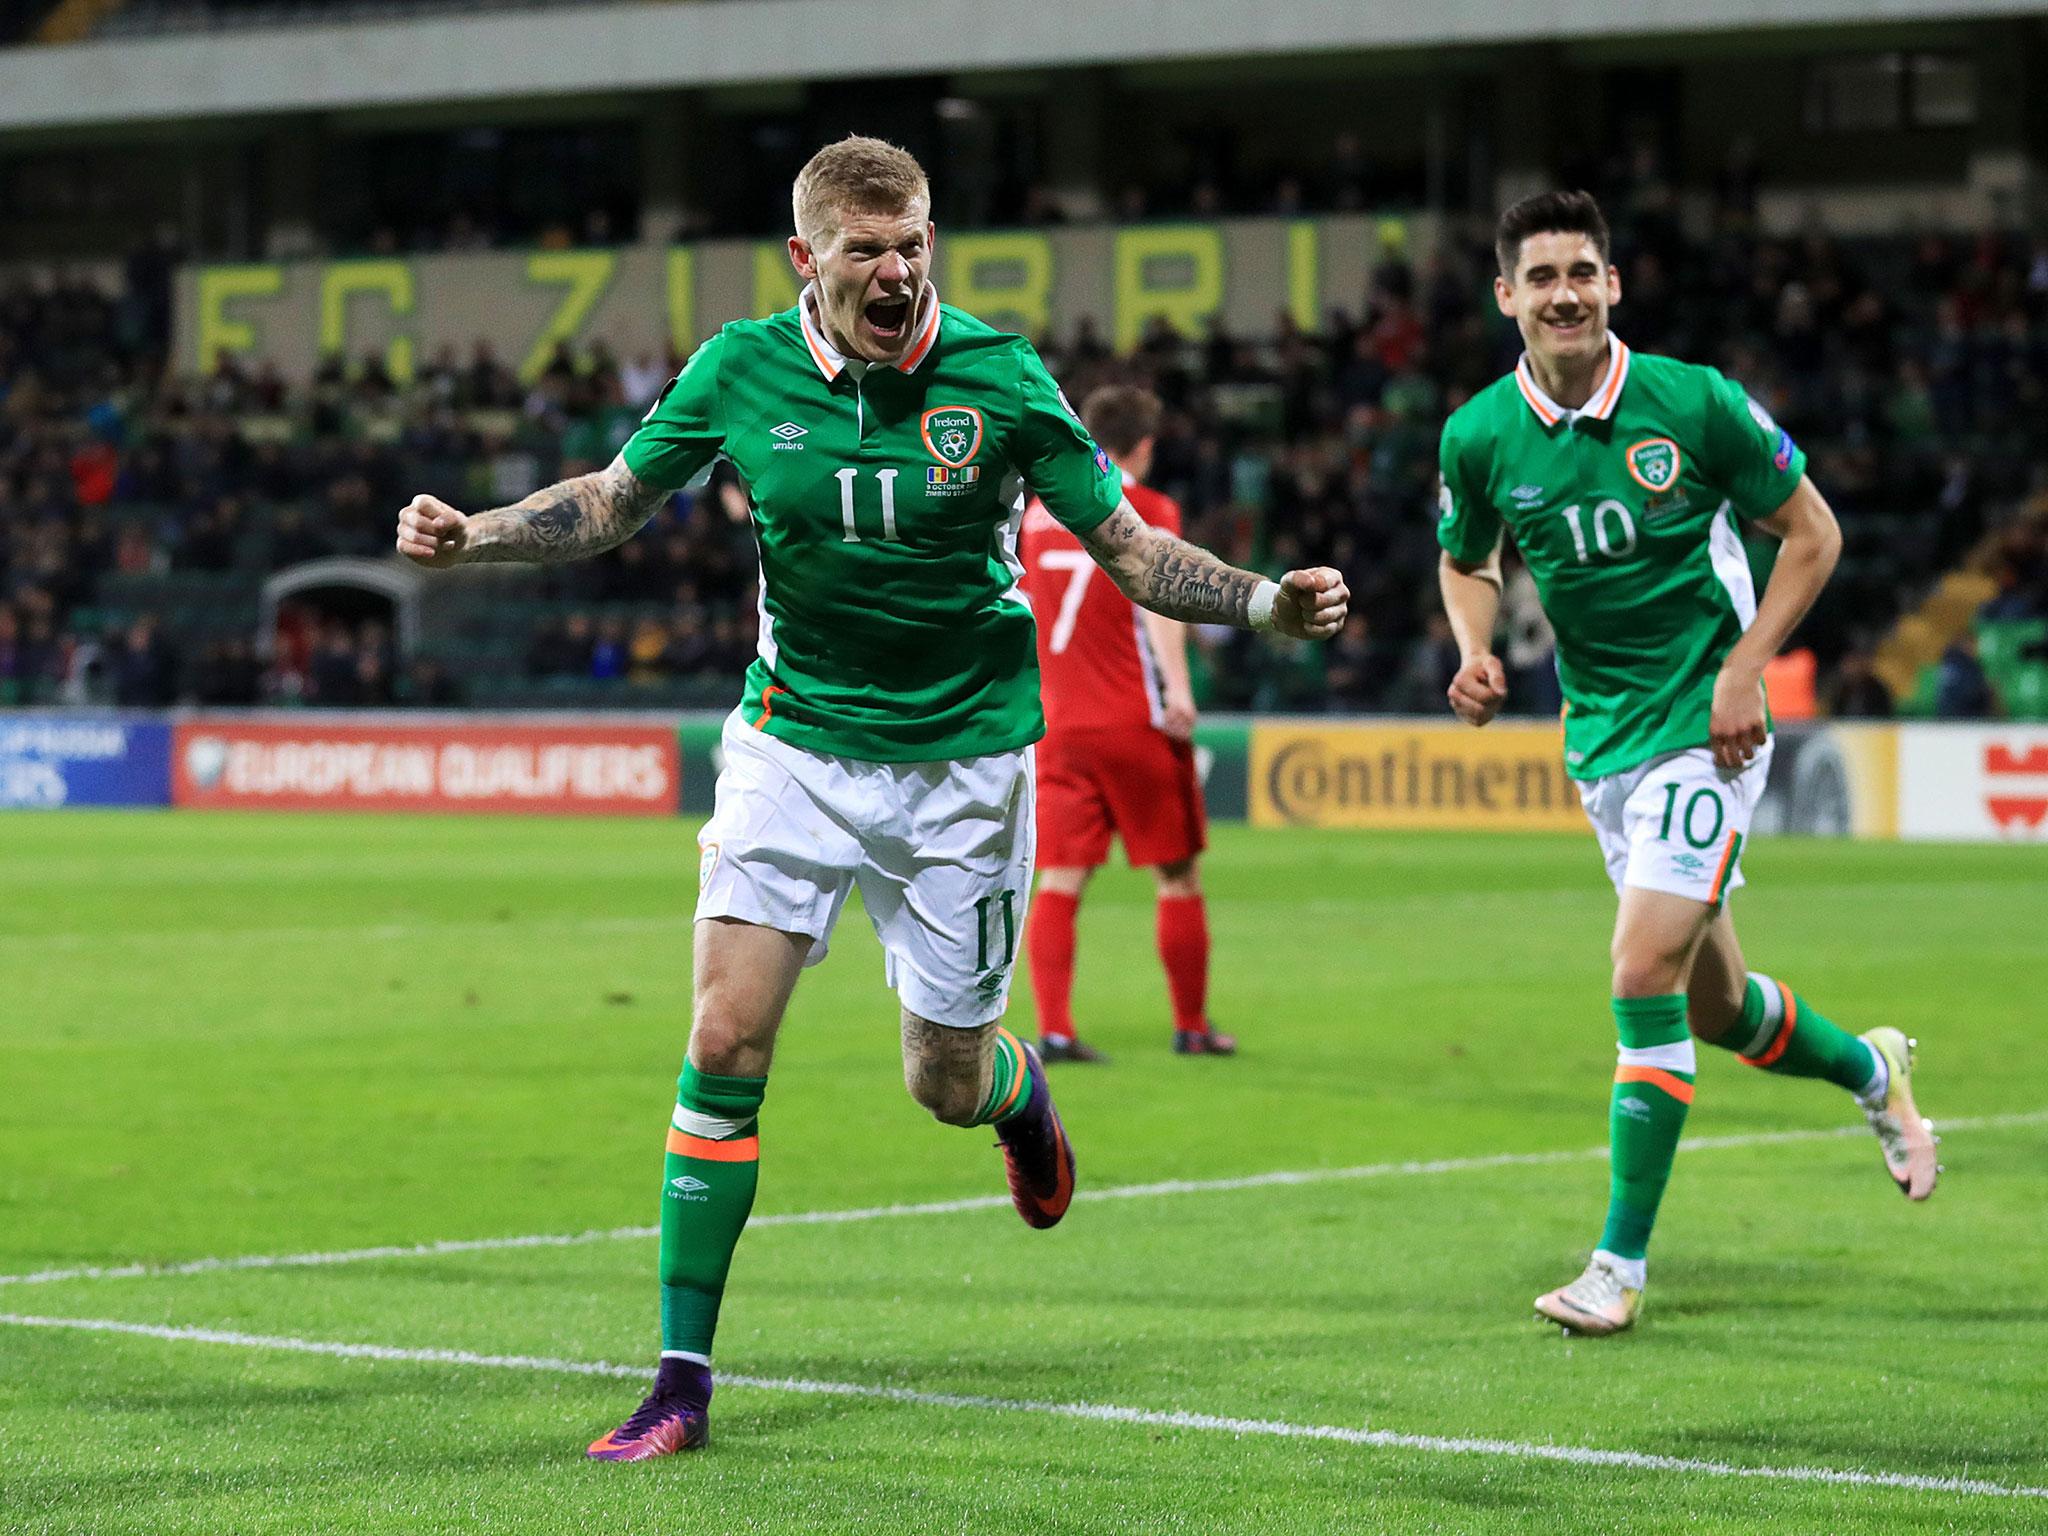 James McClean scored twice after missing several chances earlier in the match